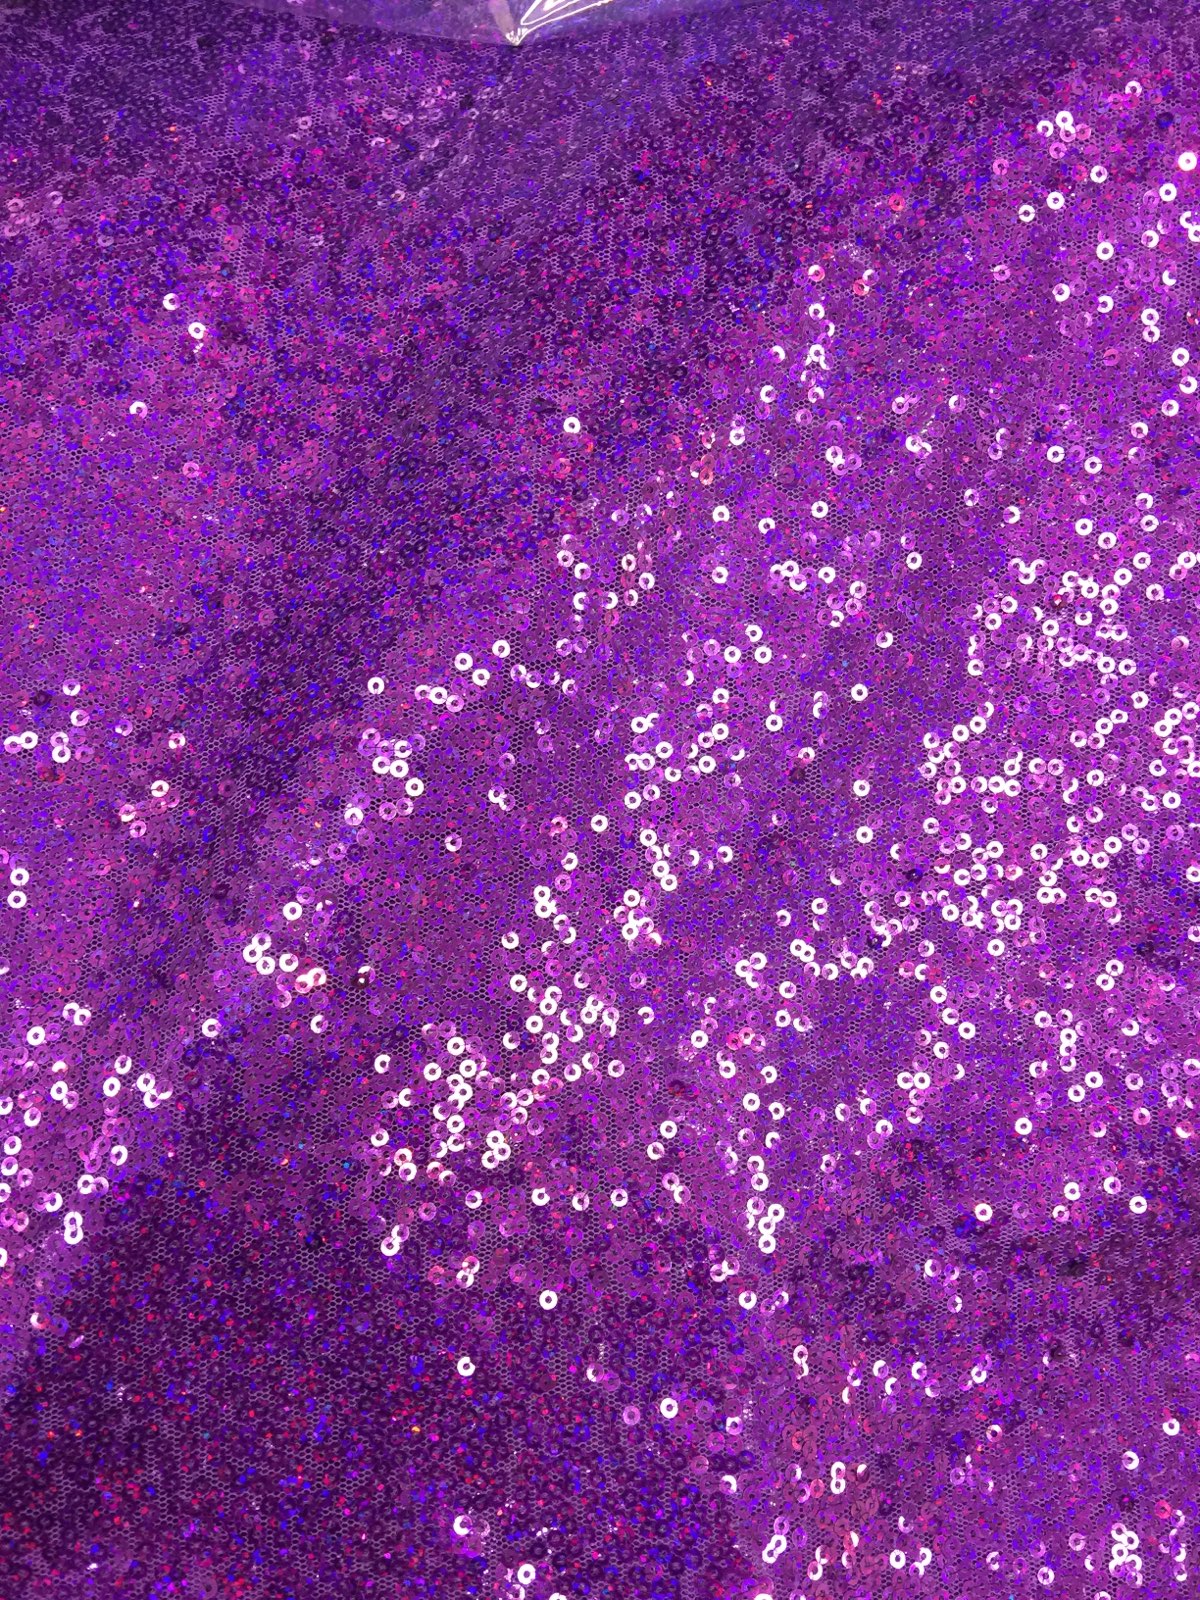 Lavender Sequin Fabric, Lavender Full Sequins Fabric, Lavender Glitz Sequins  on Mesh Fabric, Lilac Sequins Fabric by the Yard 